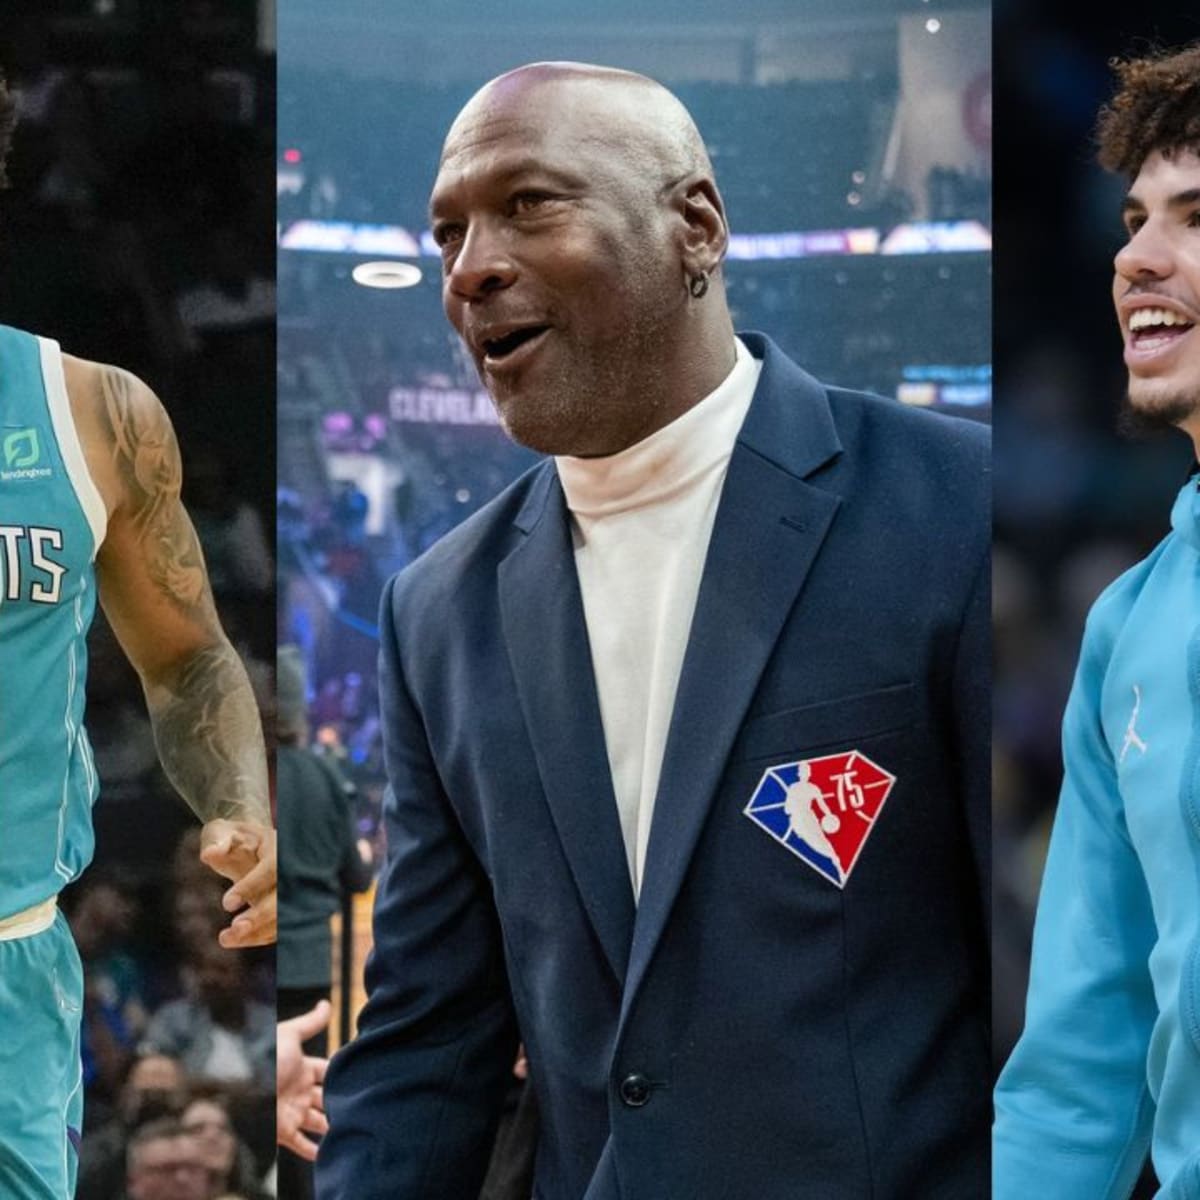 Potential new Hornets designs